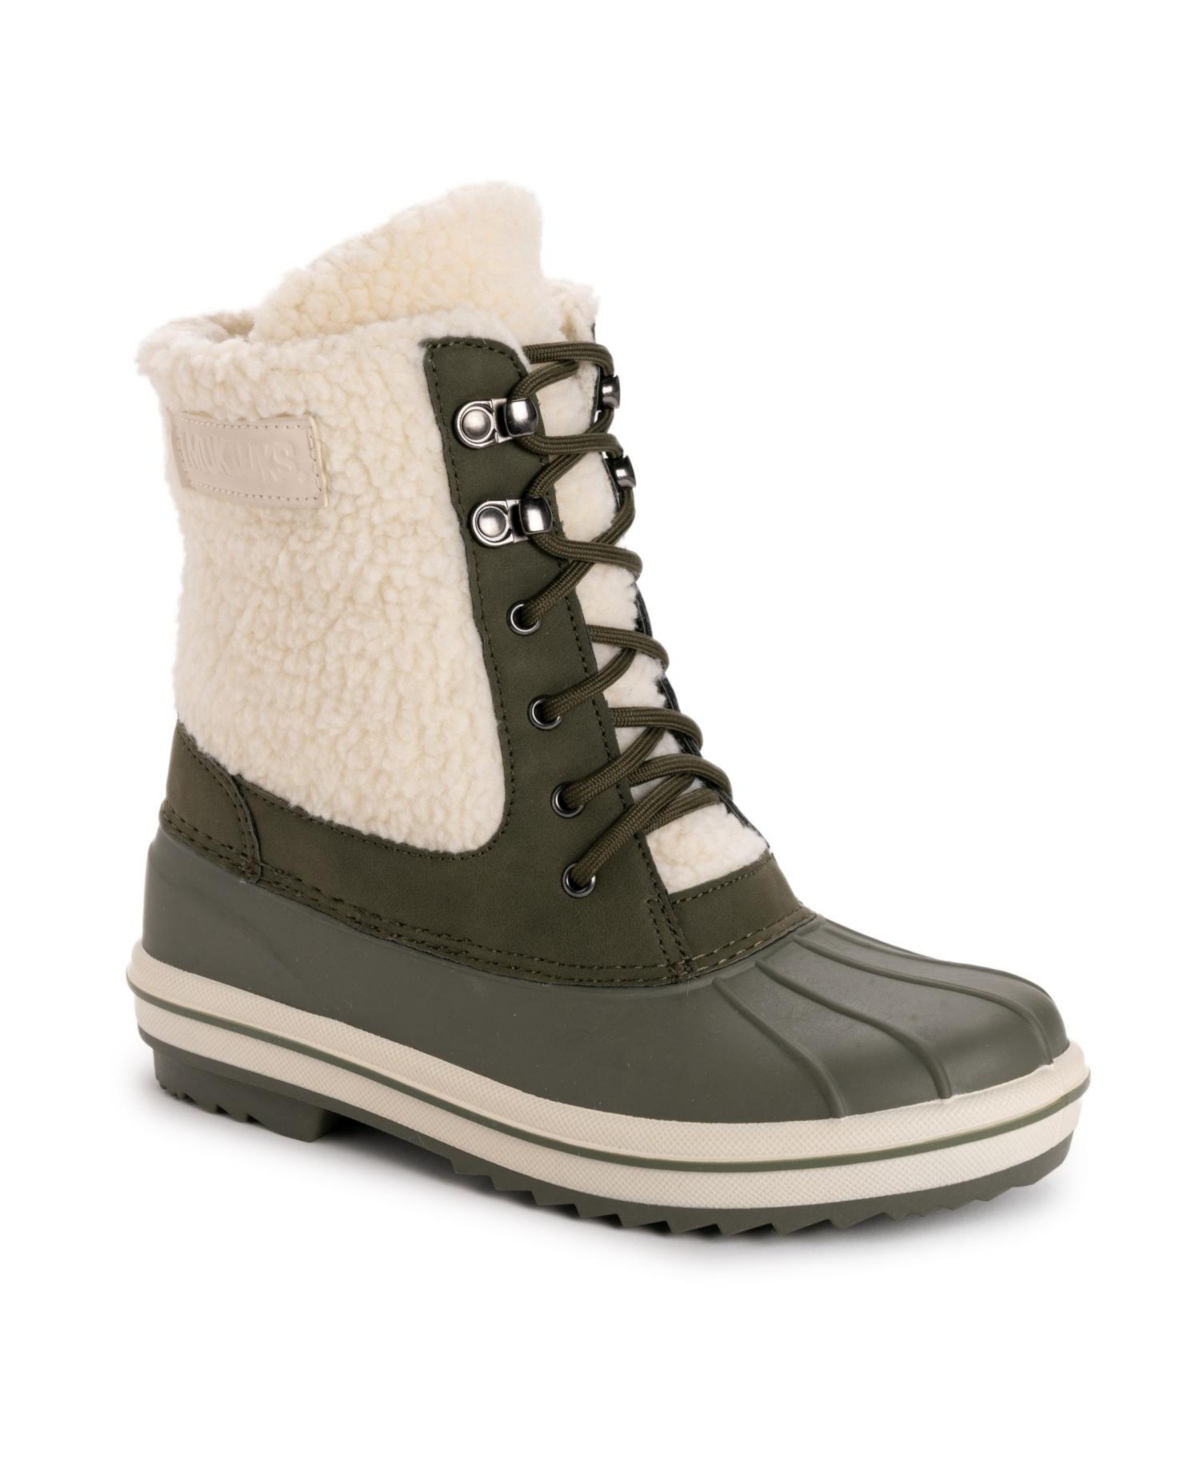 Women's Kinsley Kendall Boots, Olive - Olive